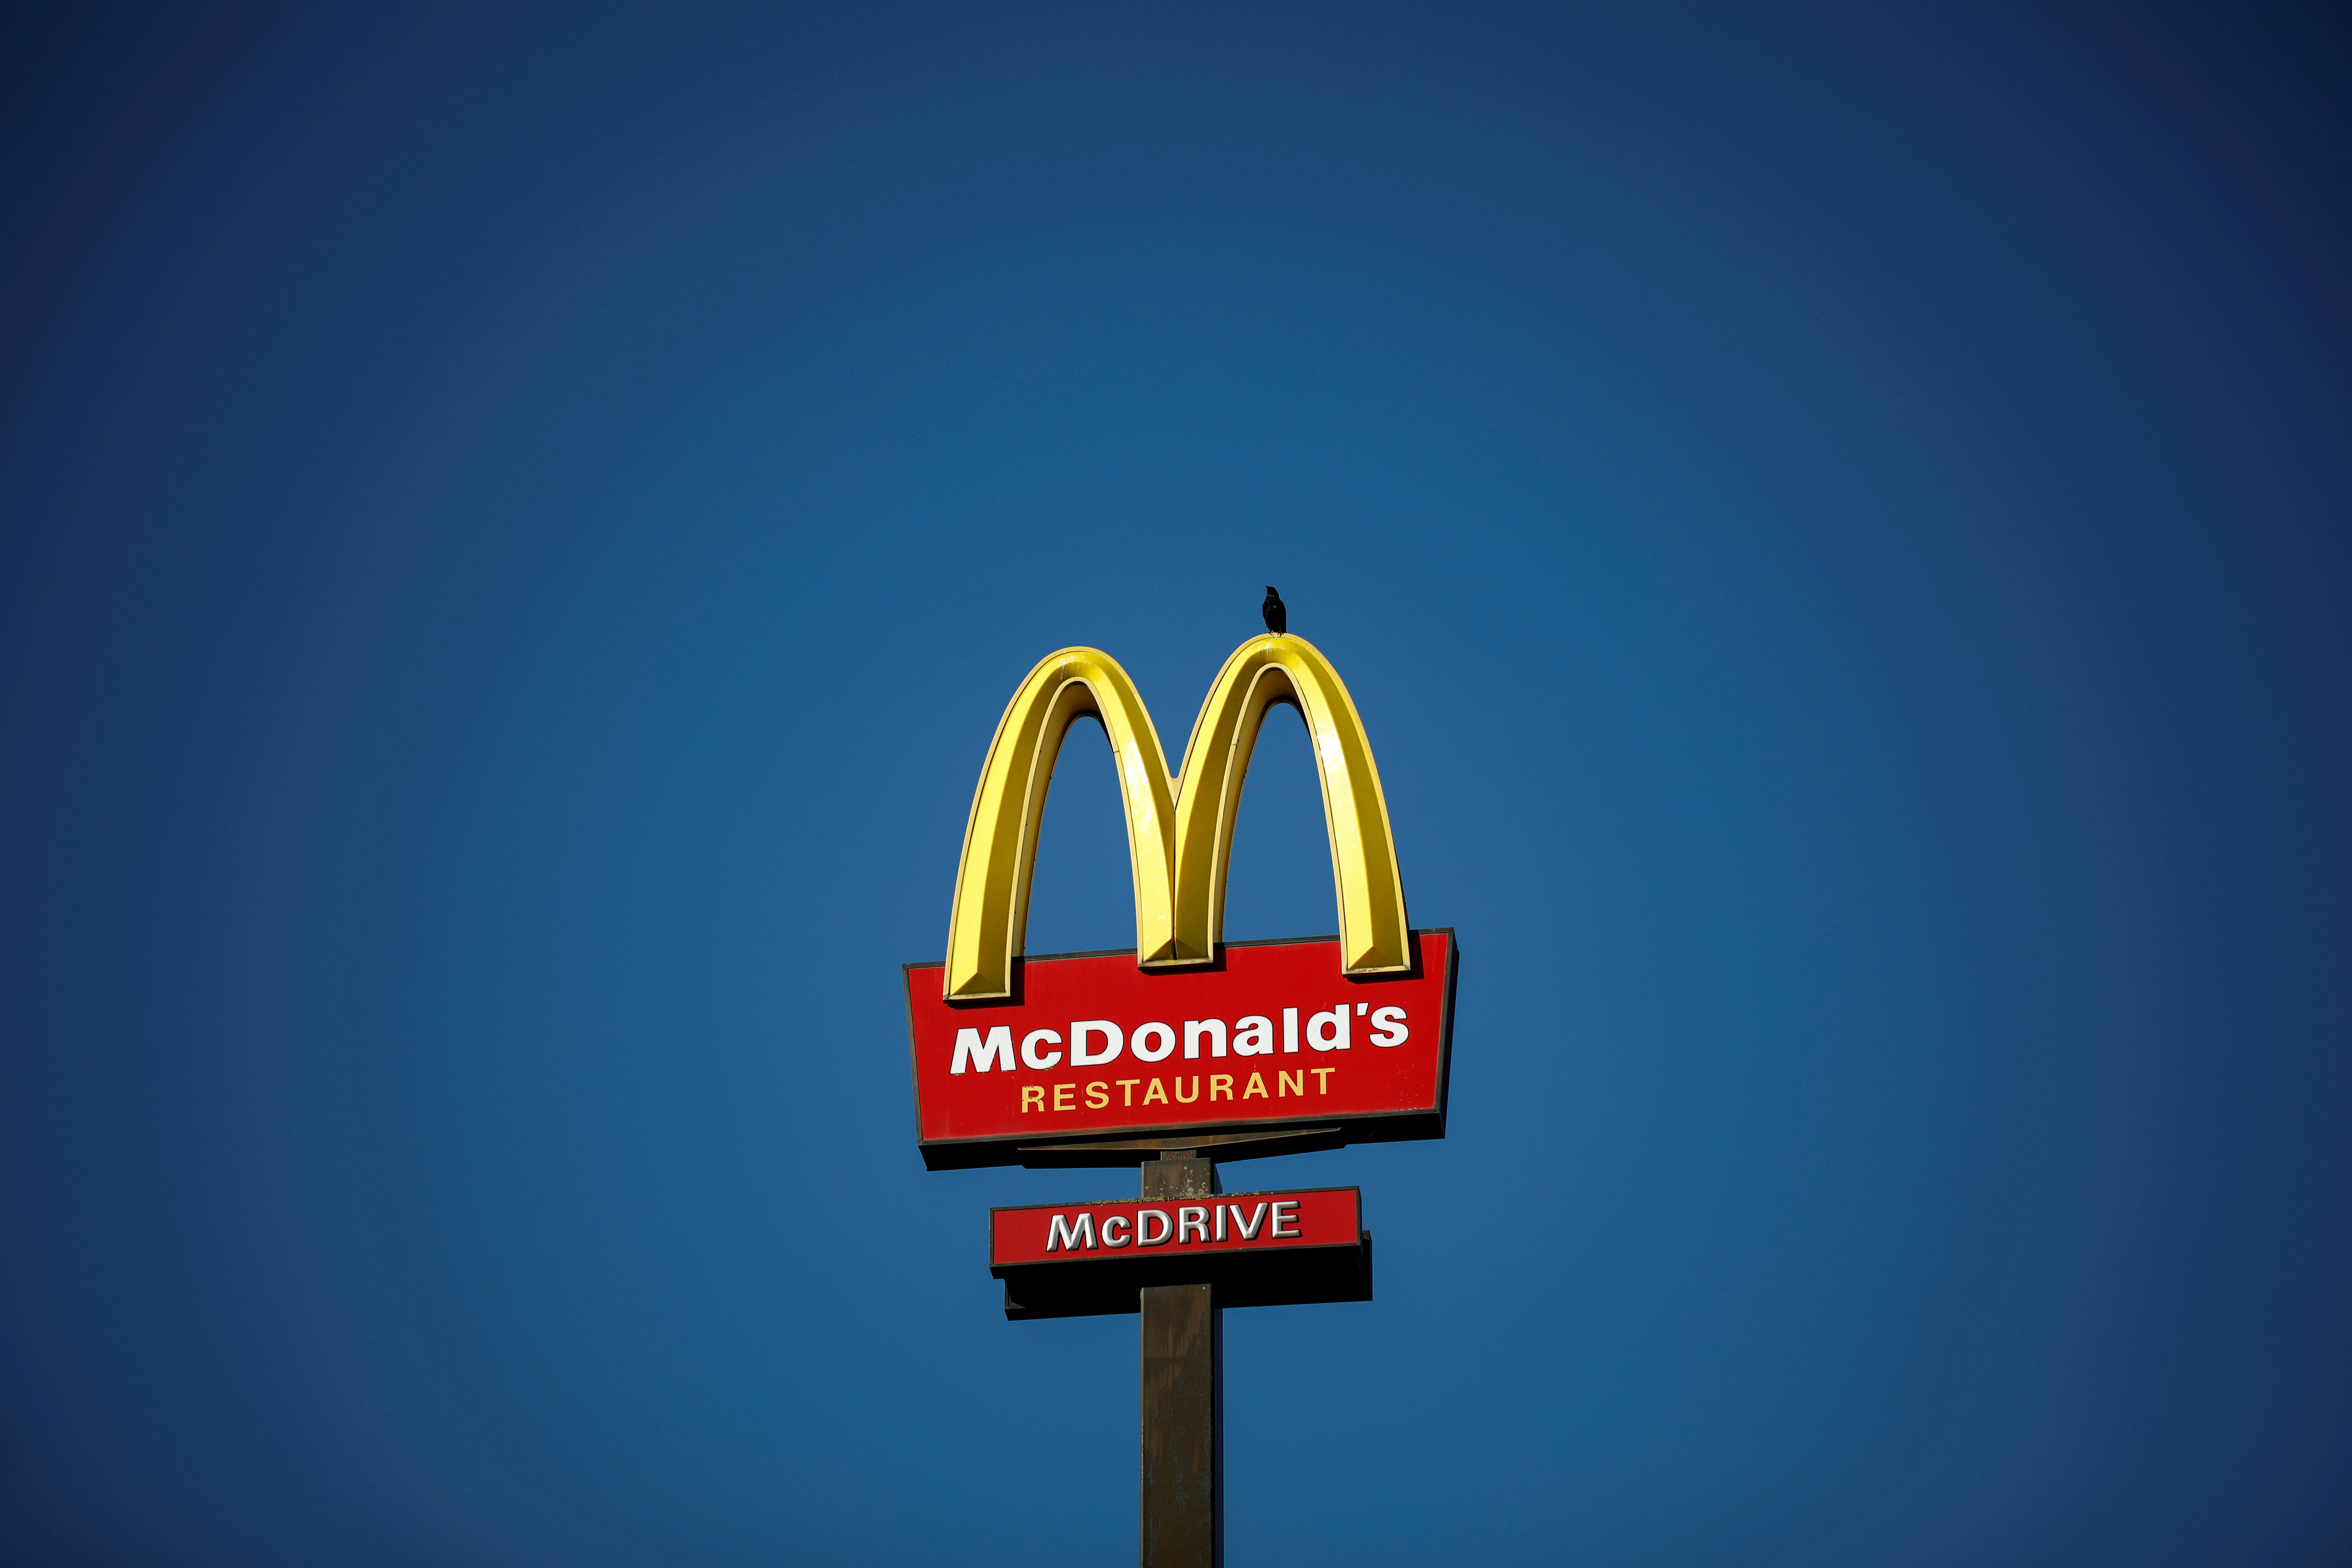 The McDonald's company logo stands on a sign outside a restaurant in Bretigny-sur-Orge, near Paris, France, July 30, 2020. REUTERS/Benoit Tessier